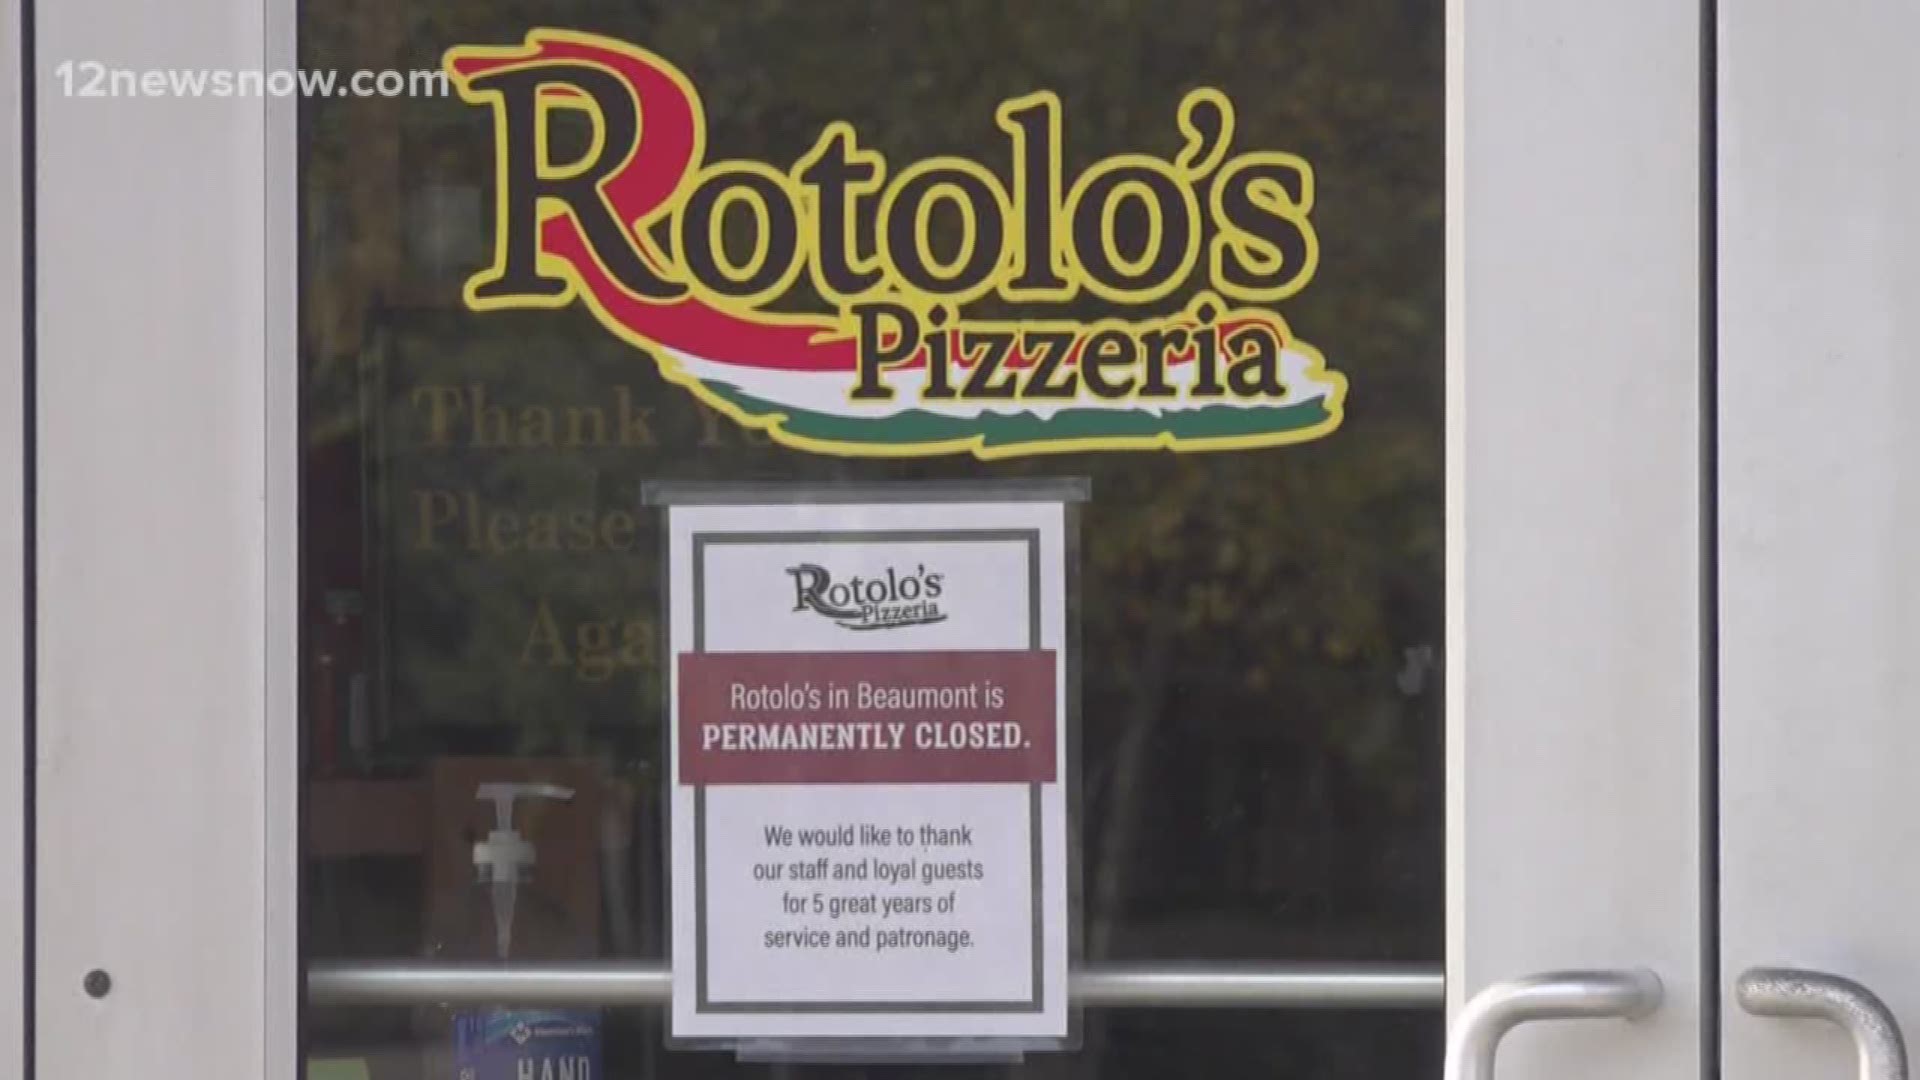 Rotolo's was located in the HEB shopping center on Dowlen Road.